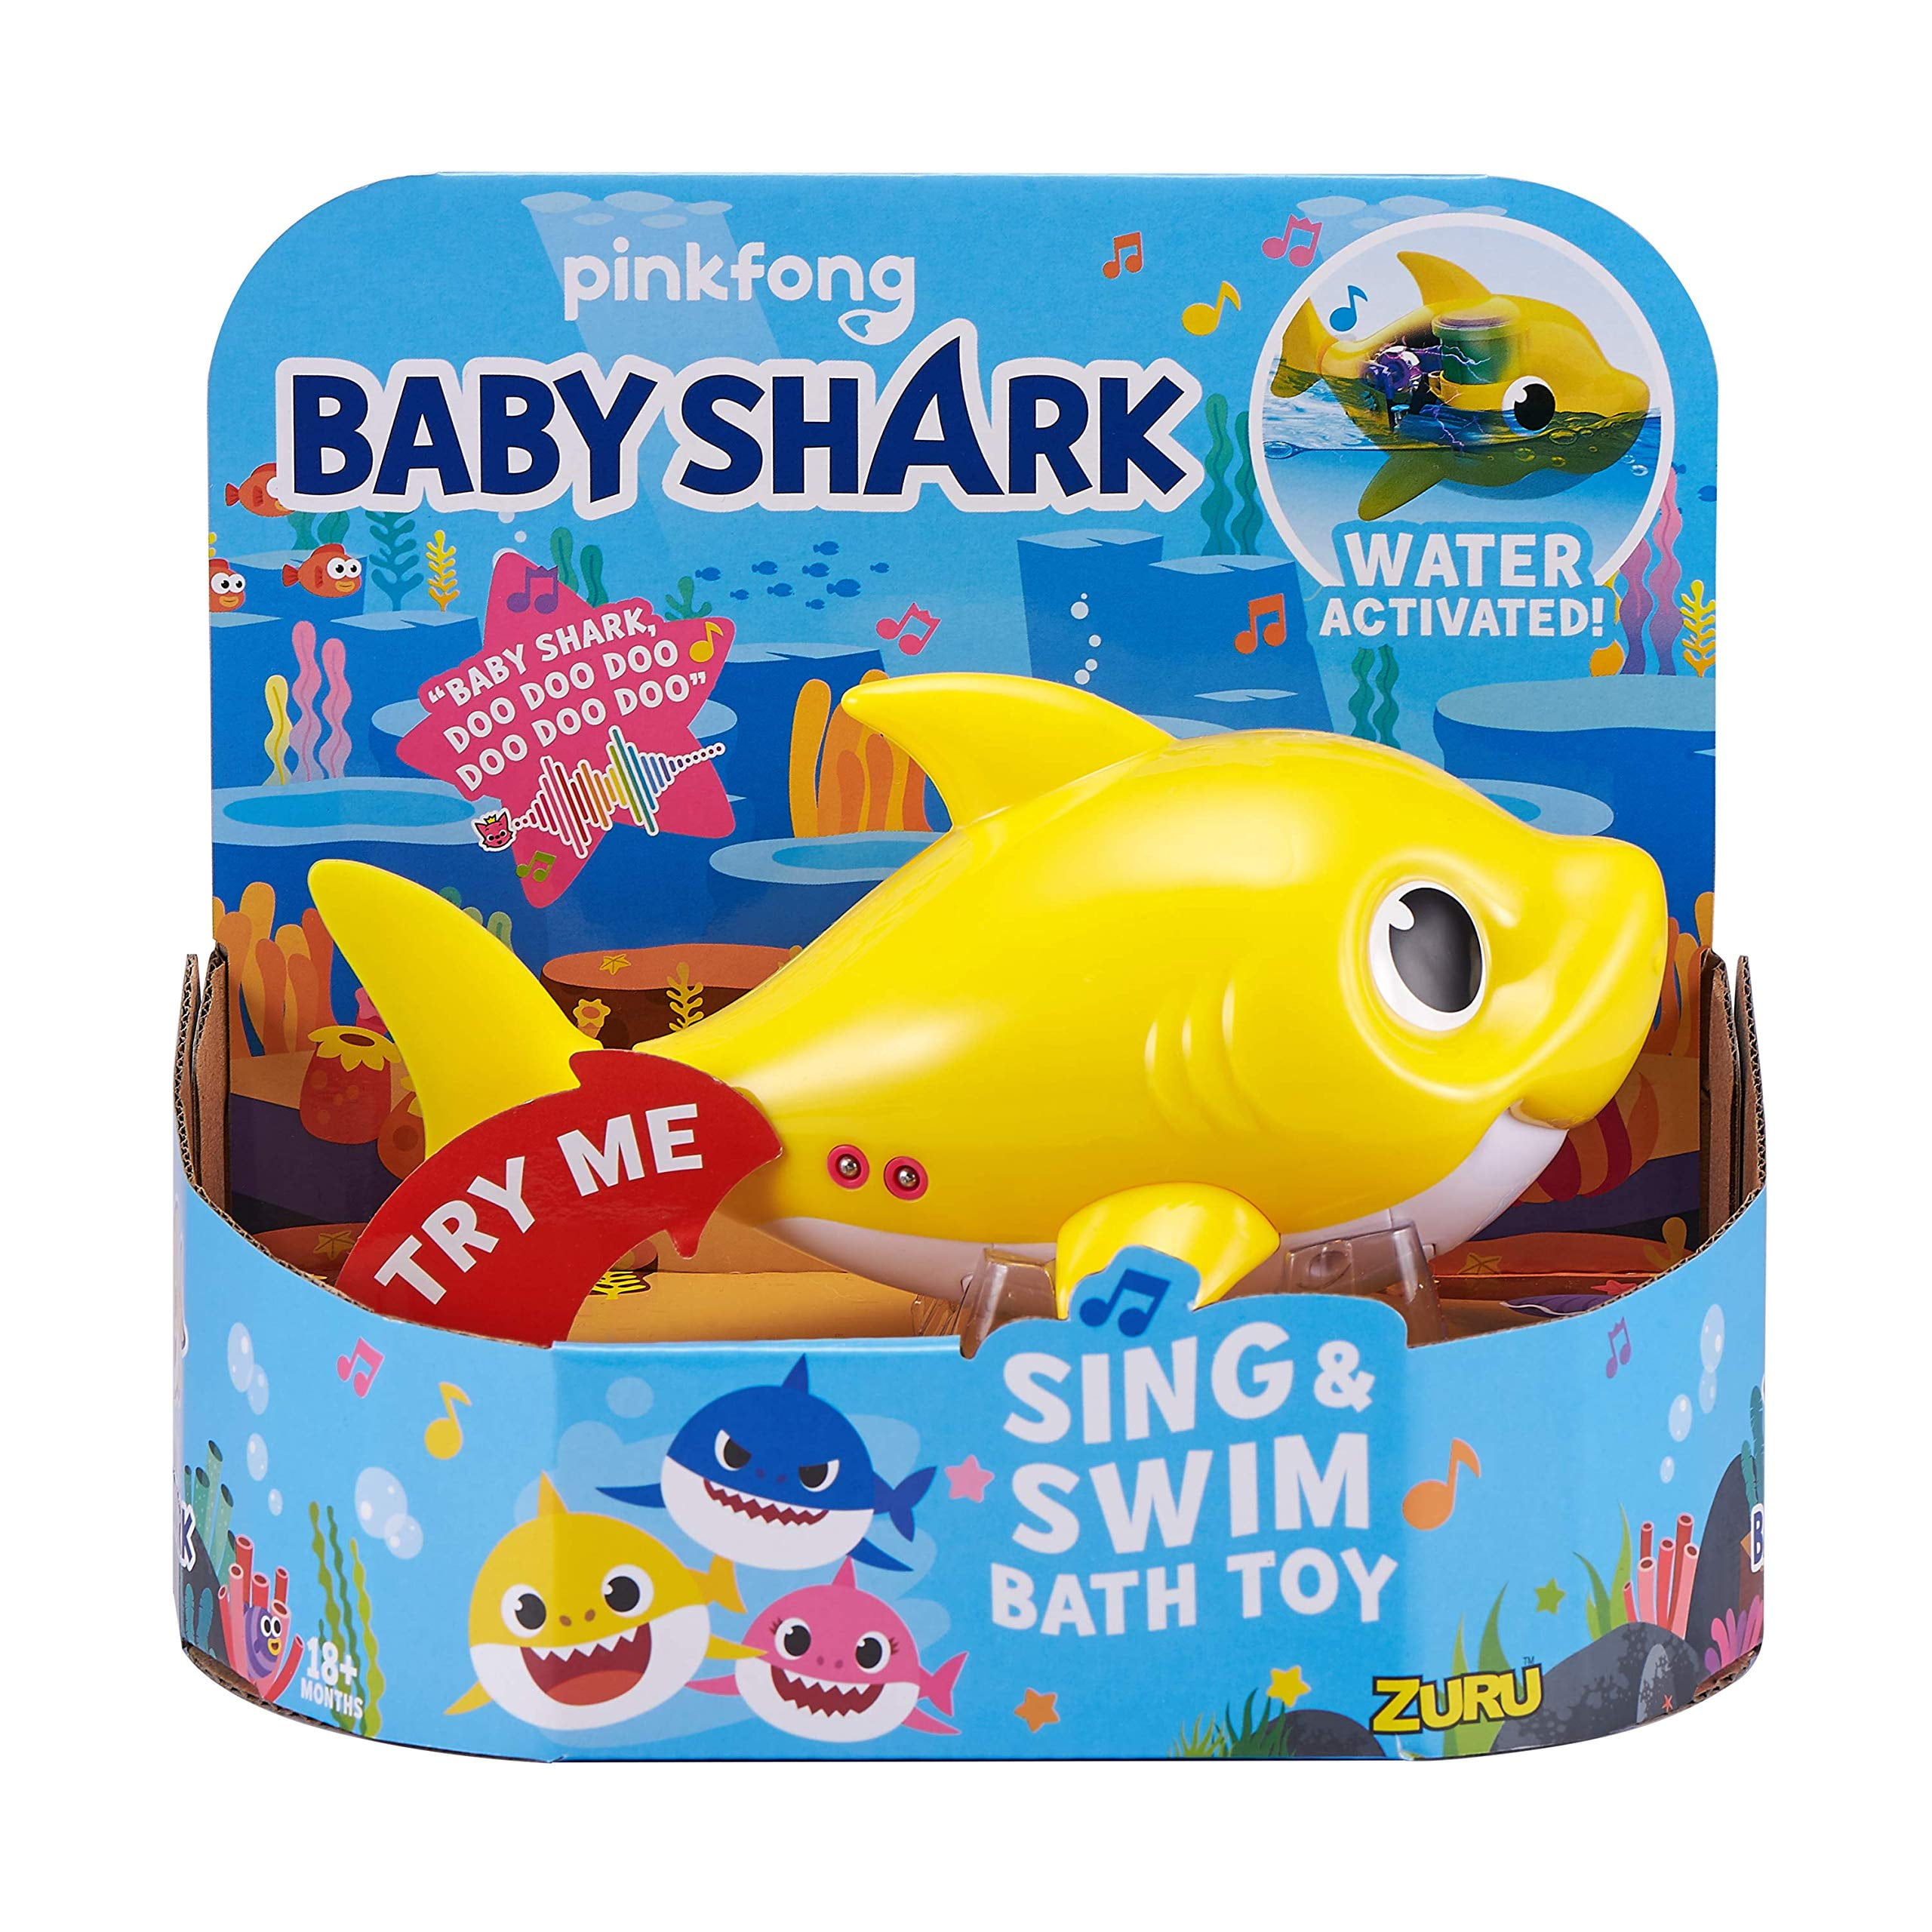 Pinkfong Baby Shark Bath Squirt Toy Set of 3 Bags Red Blue Yellow NEW SEALED